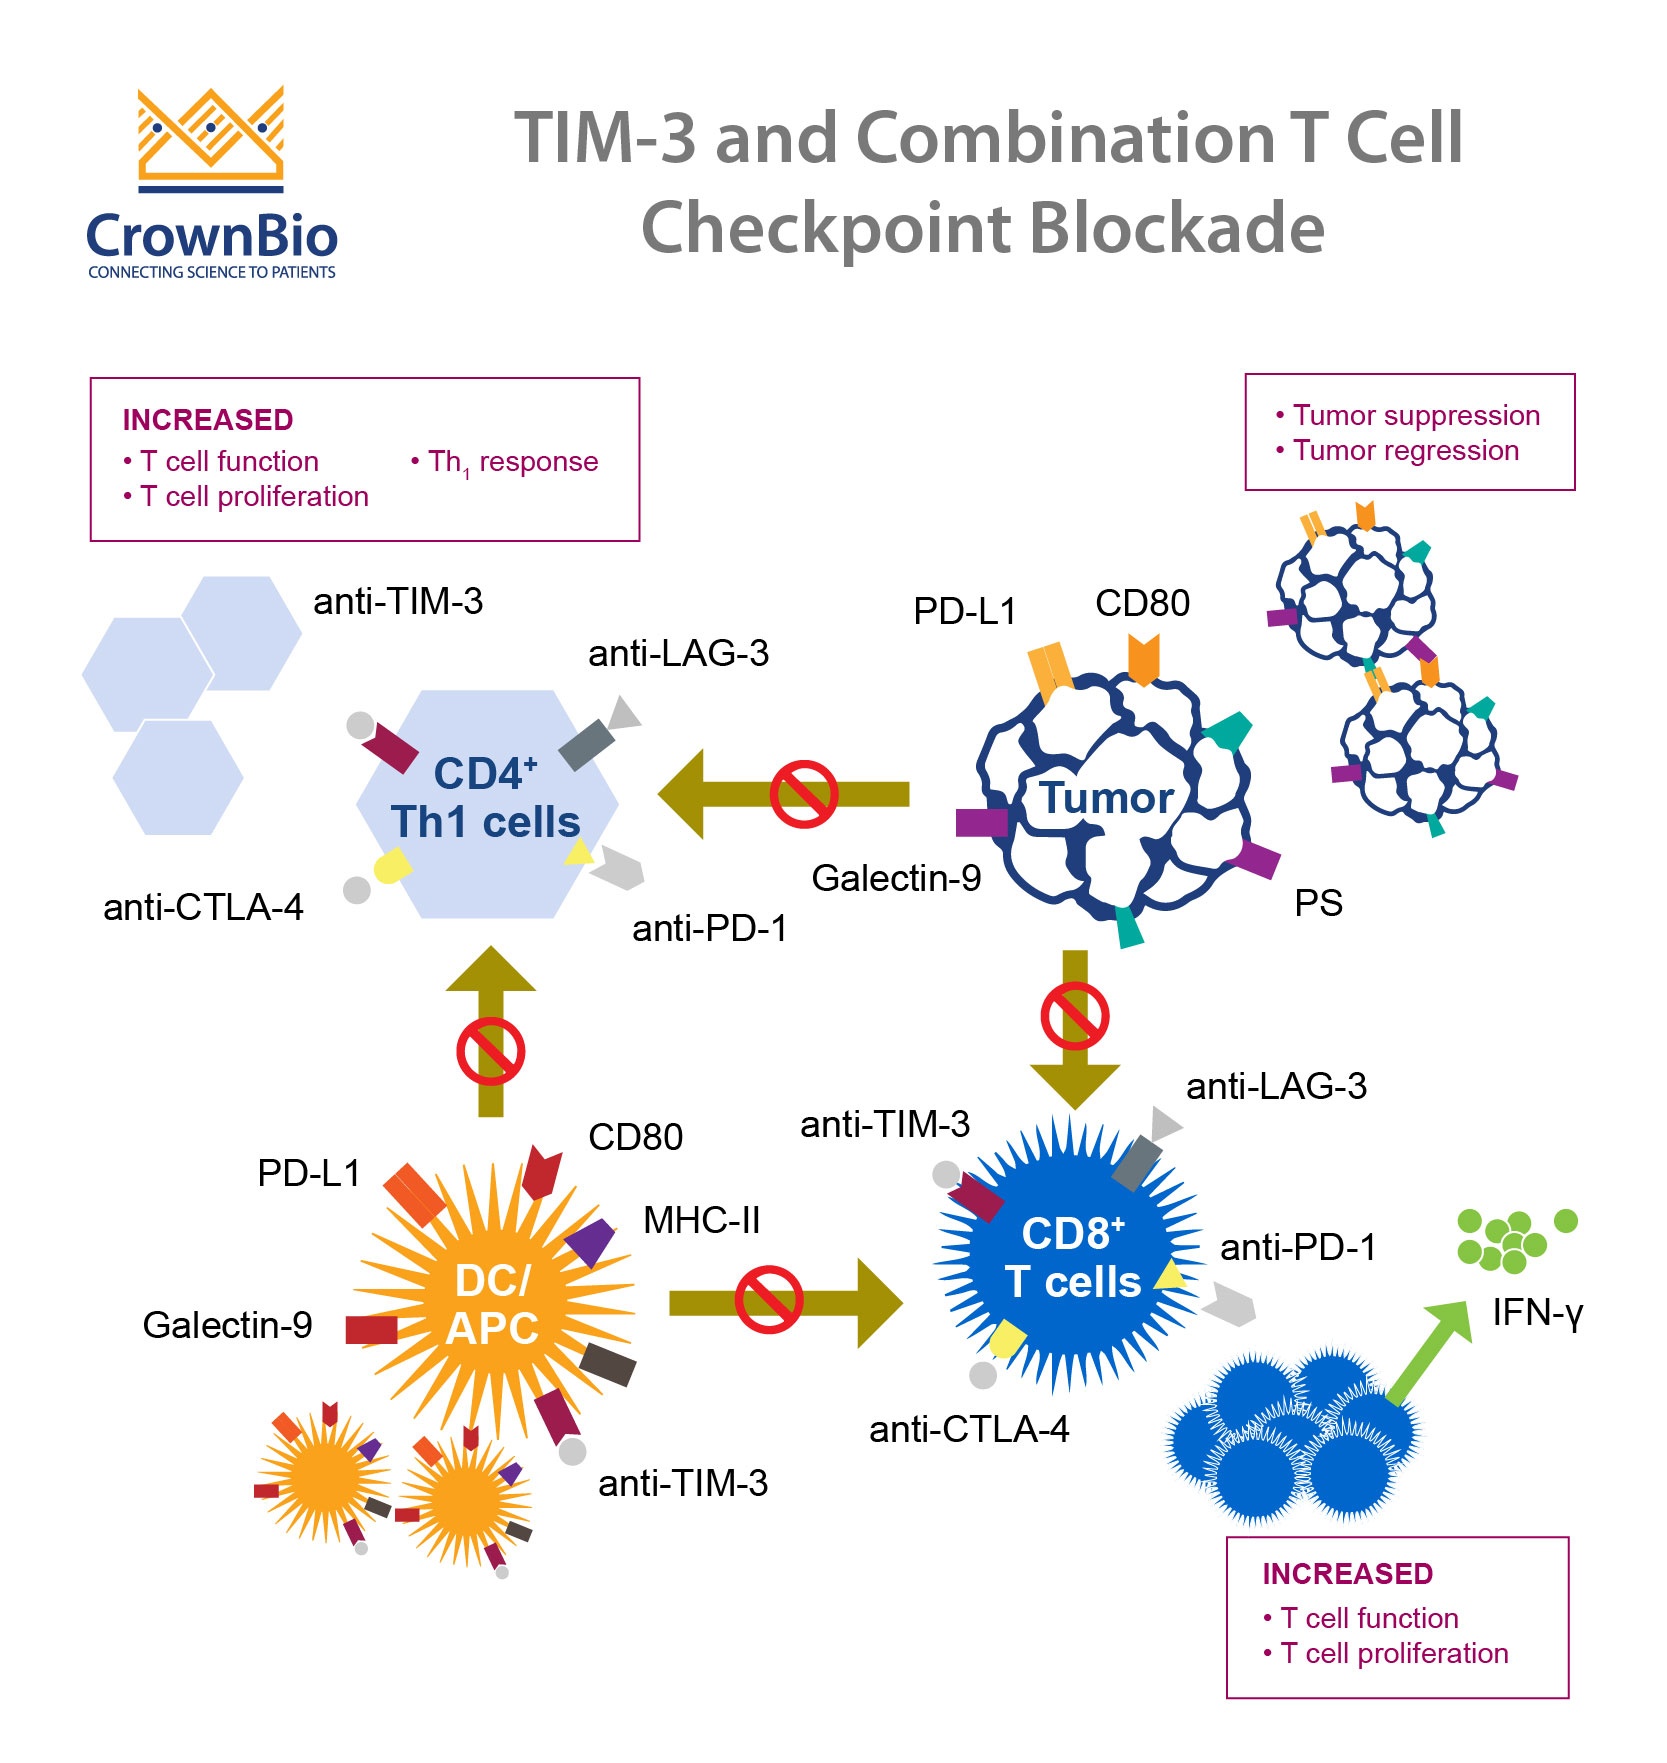 What's Next for Immune Checkpoint Inhibitors: TIM-3?